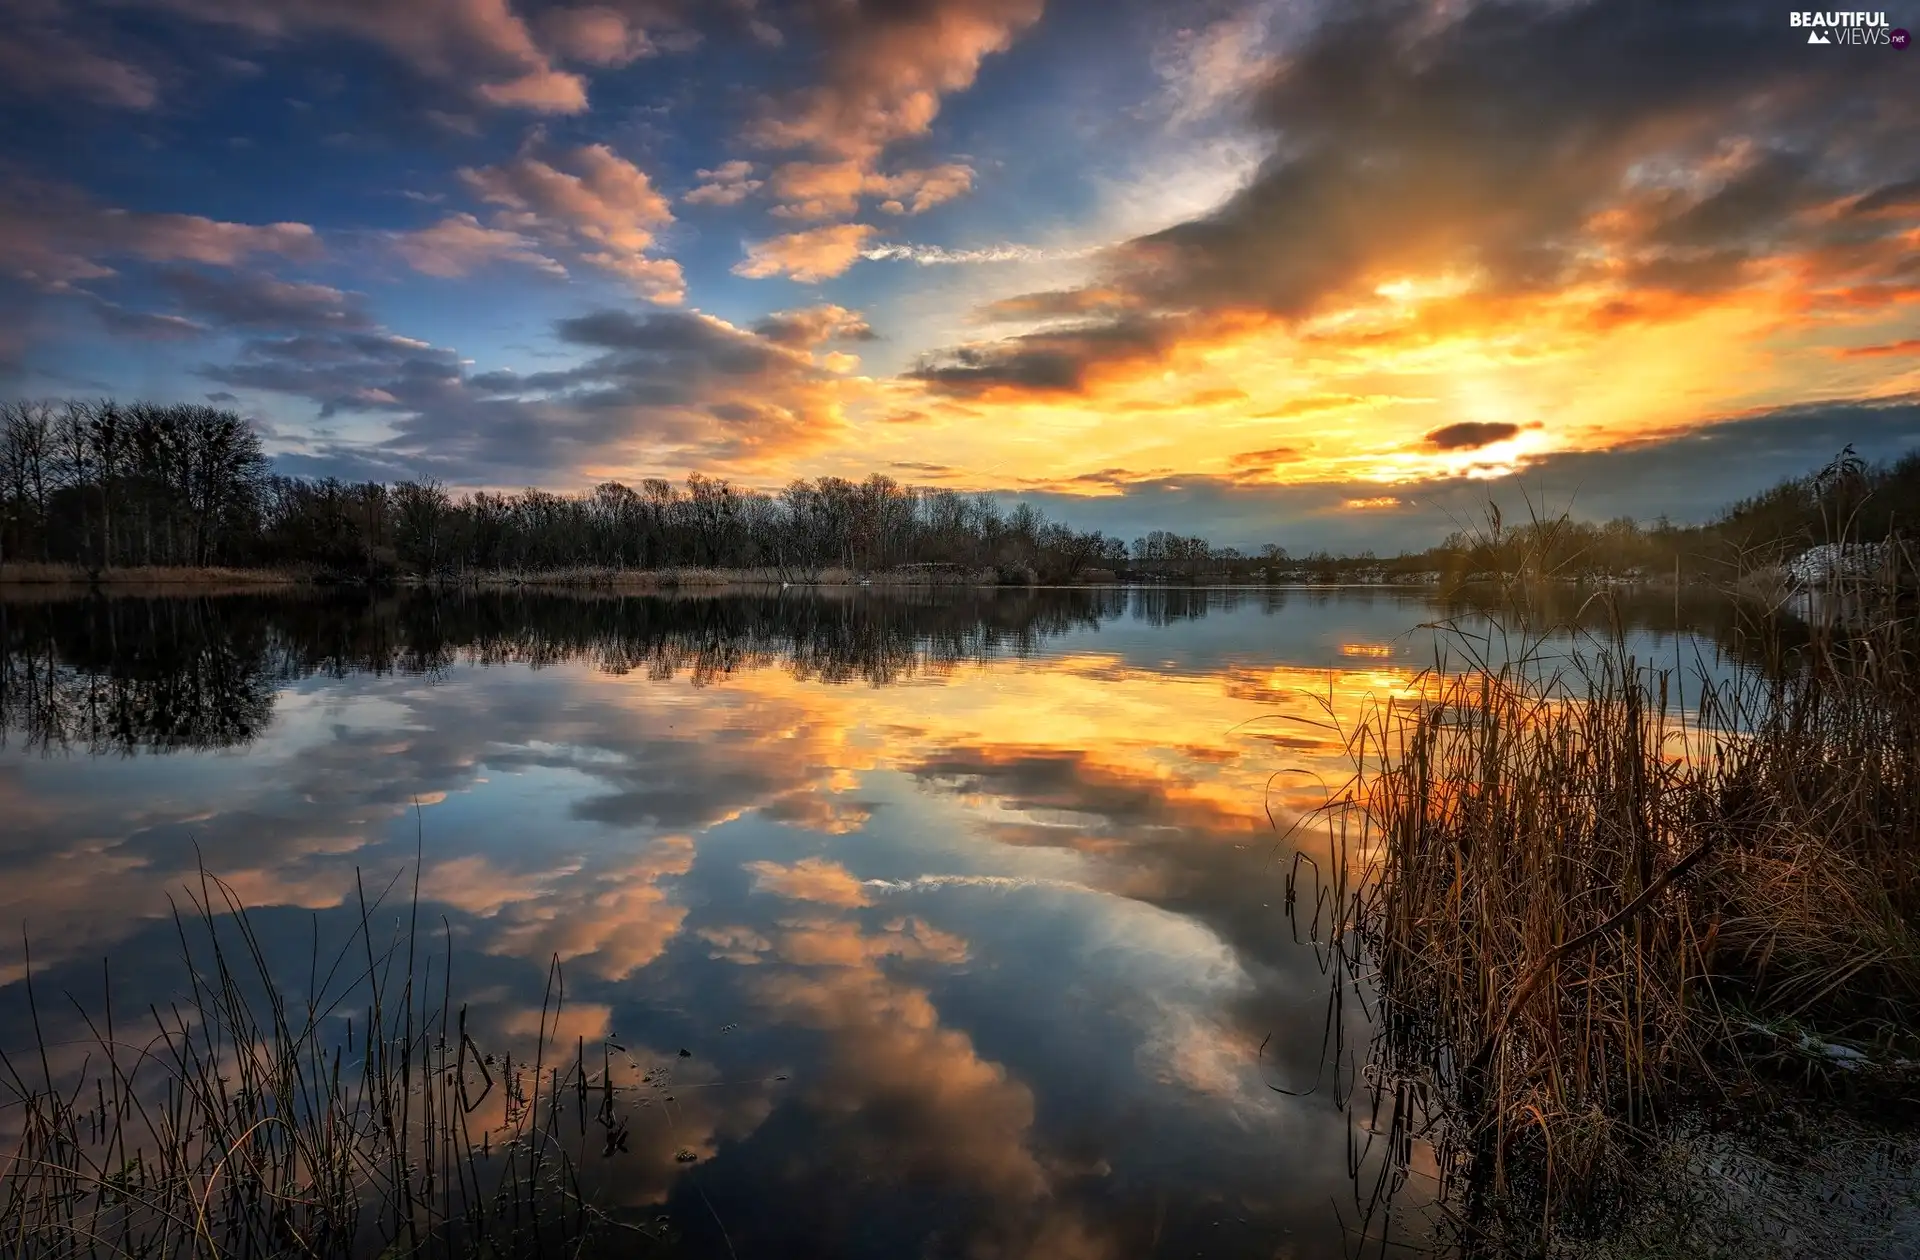 viewes, Great Sunsets, clouds, trees, lake, rushes, reflection